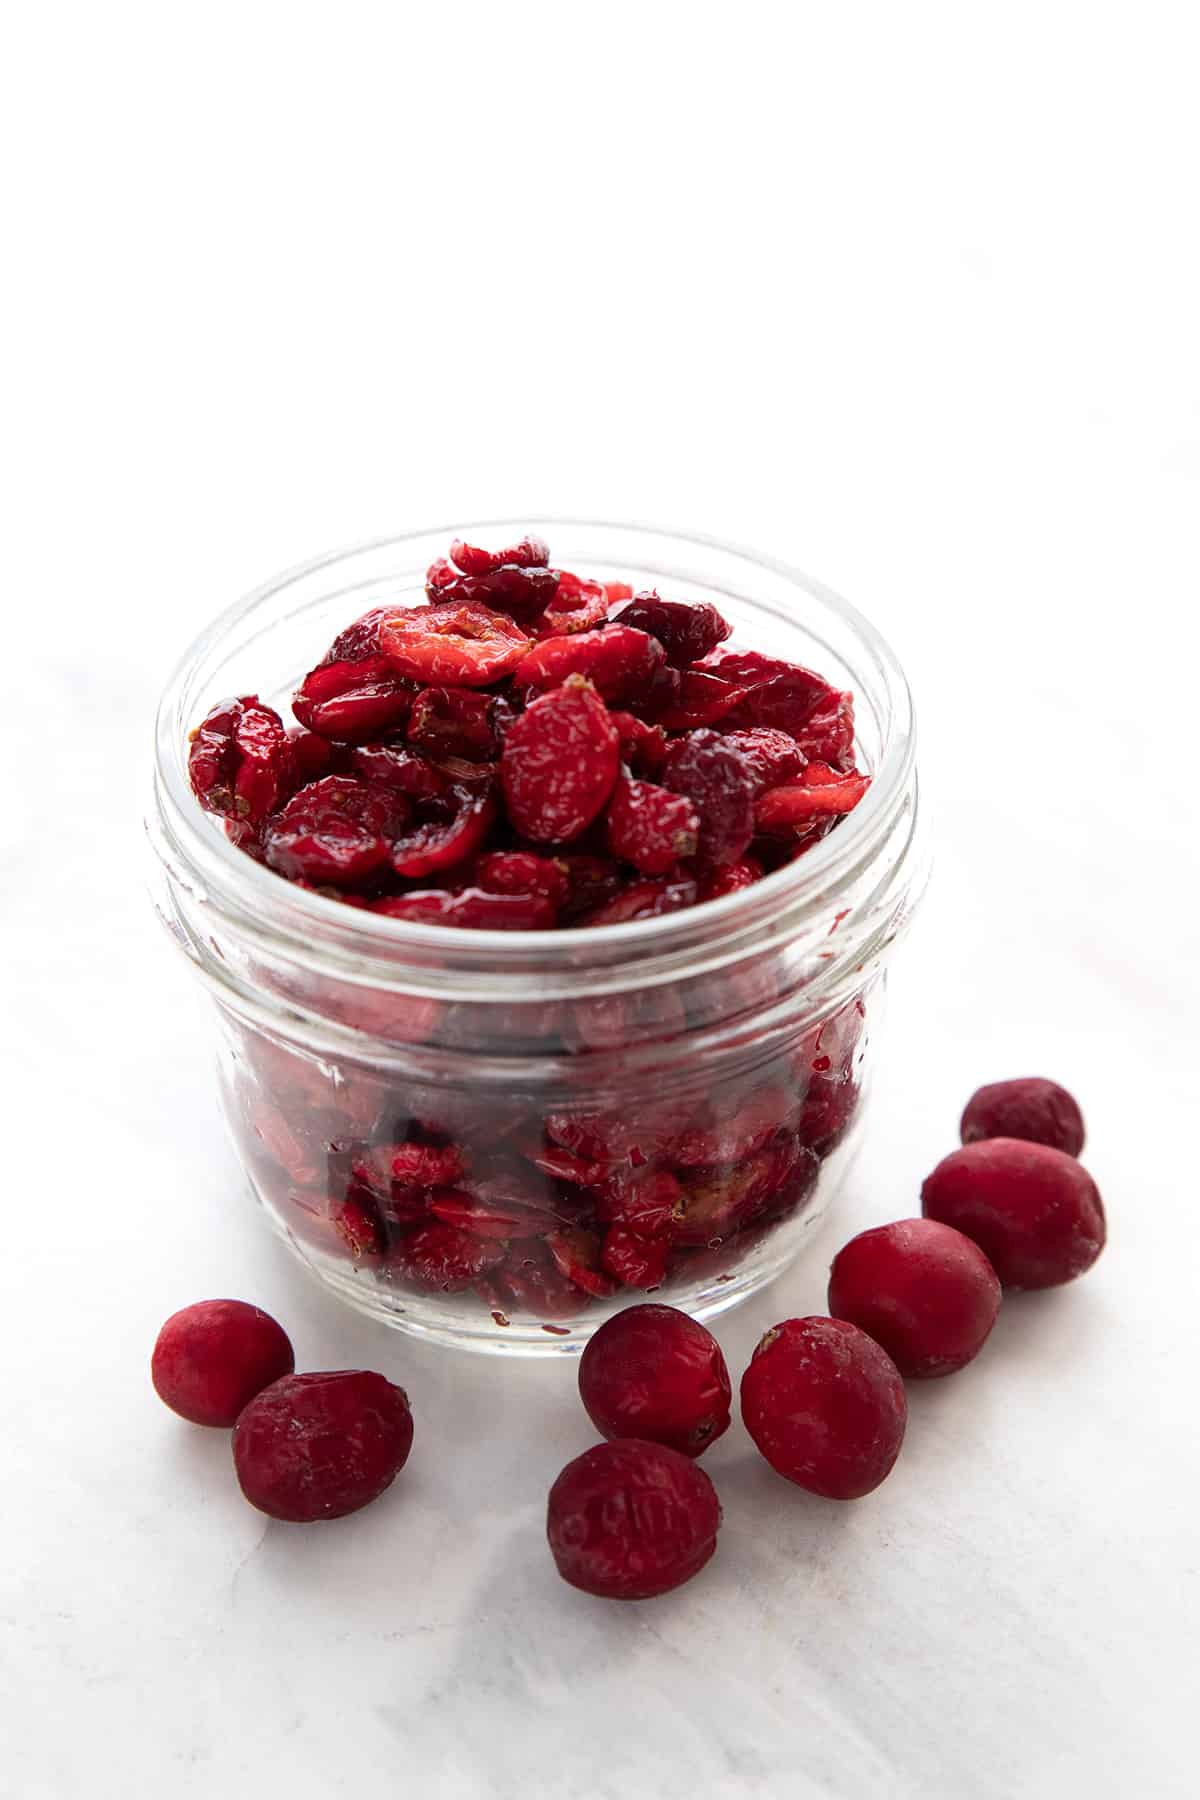 A jar of homemade dried cranberries with no added sugar.